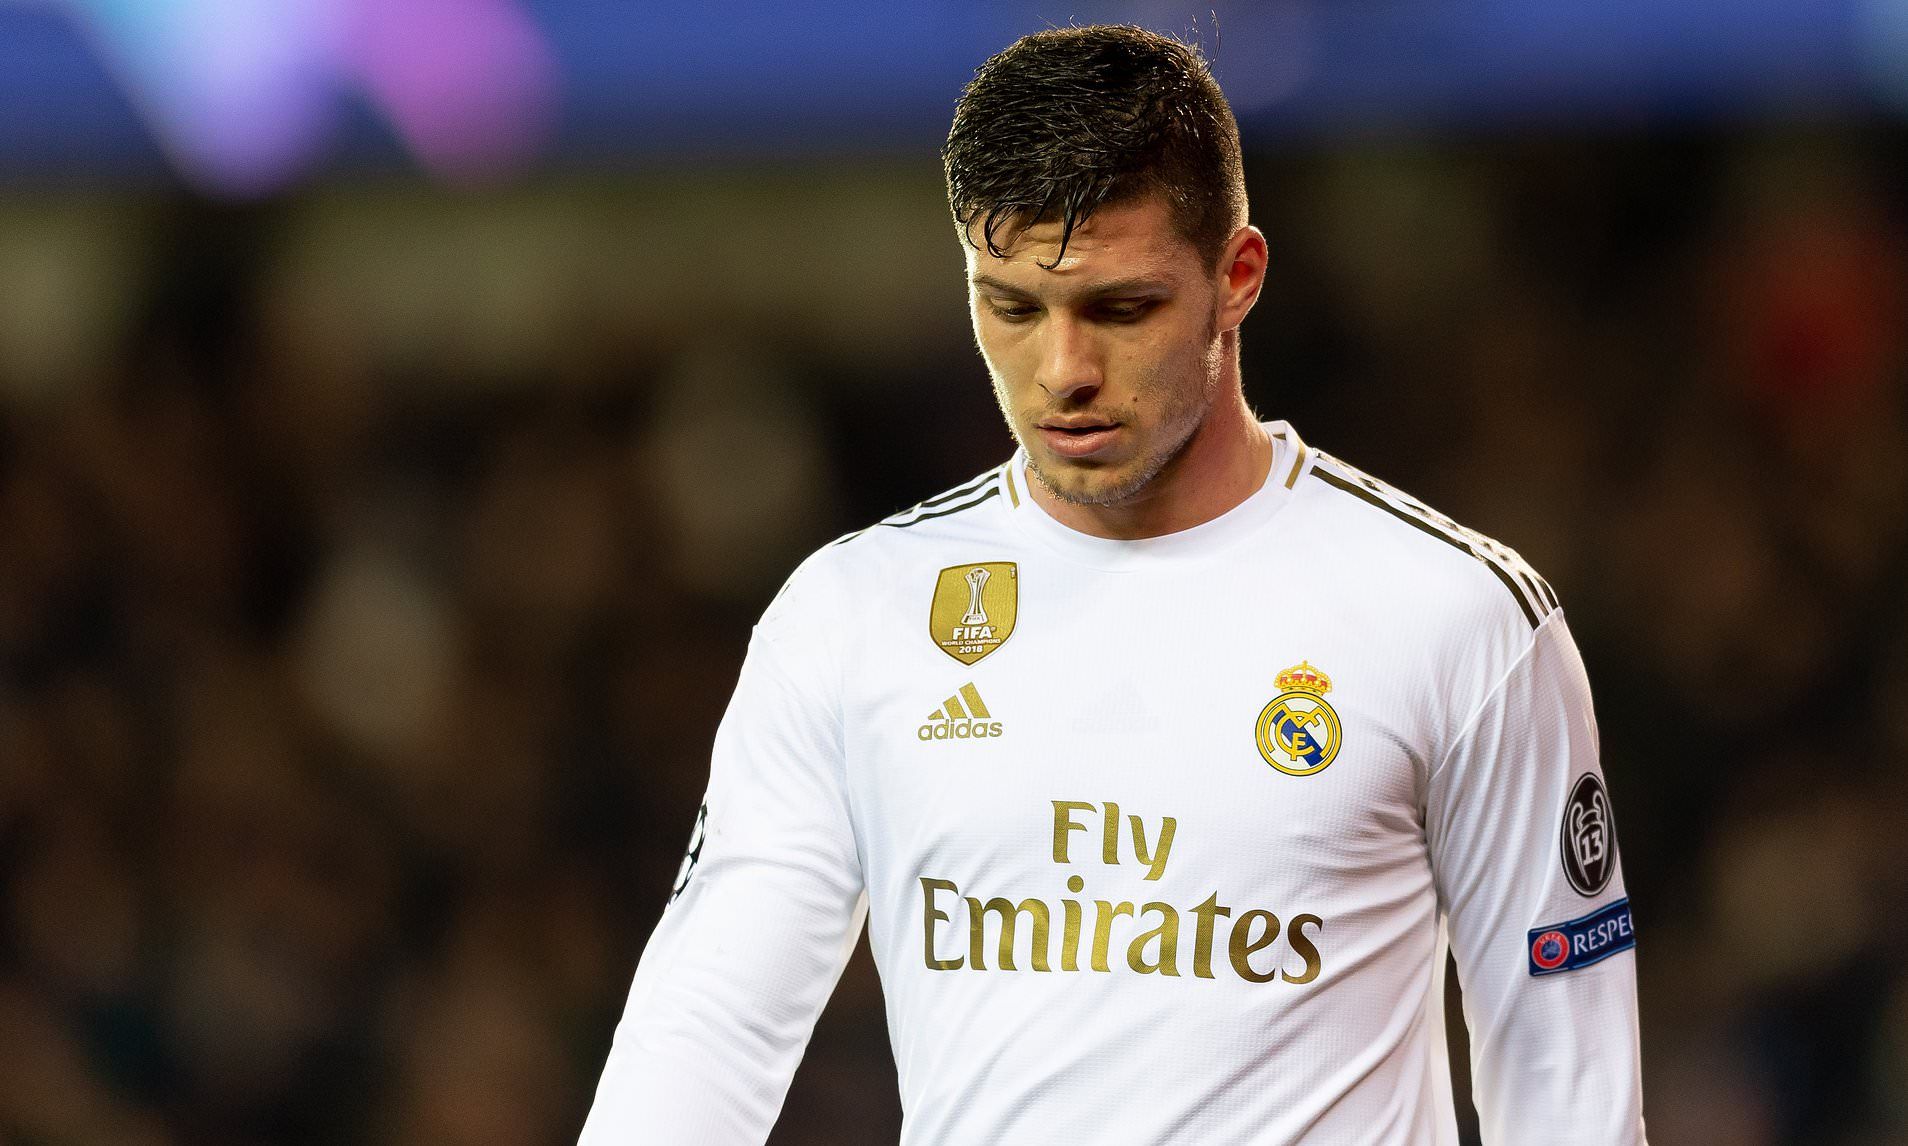 Real Madrid striker tests positive for Covid-19